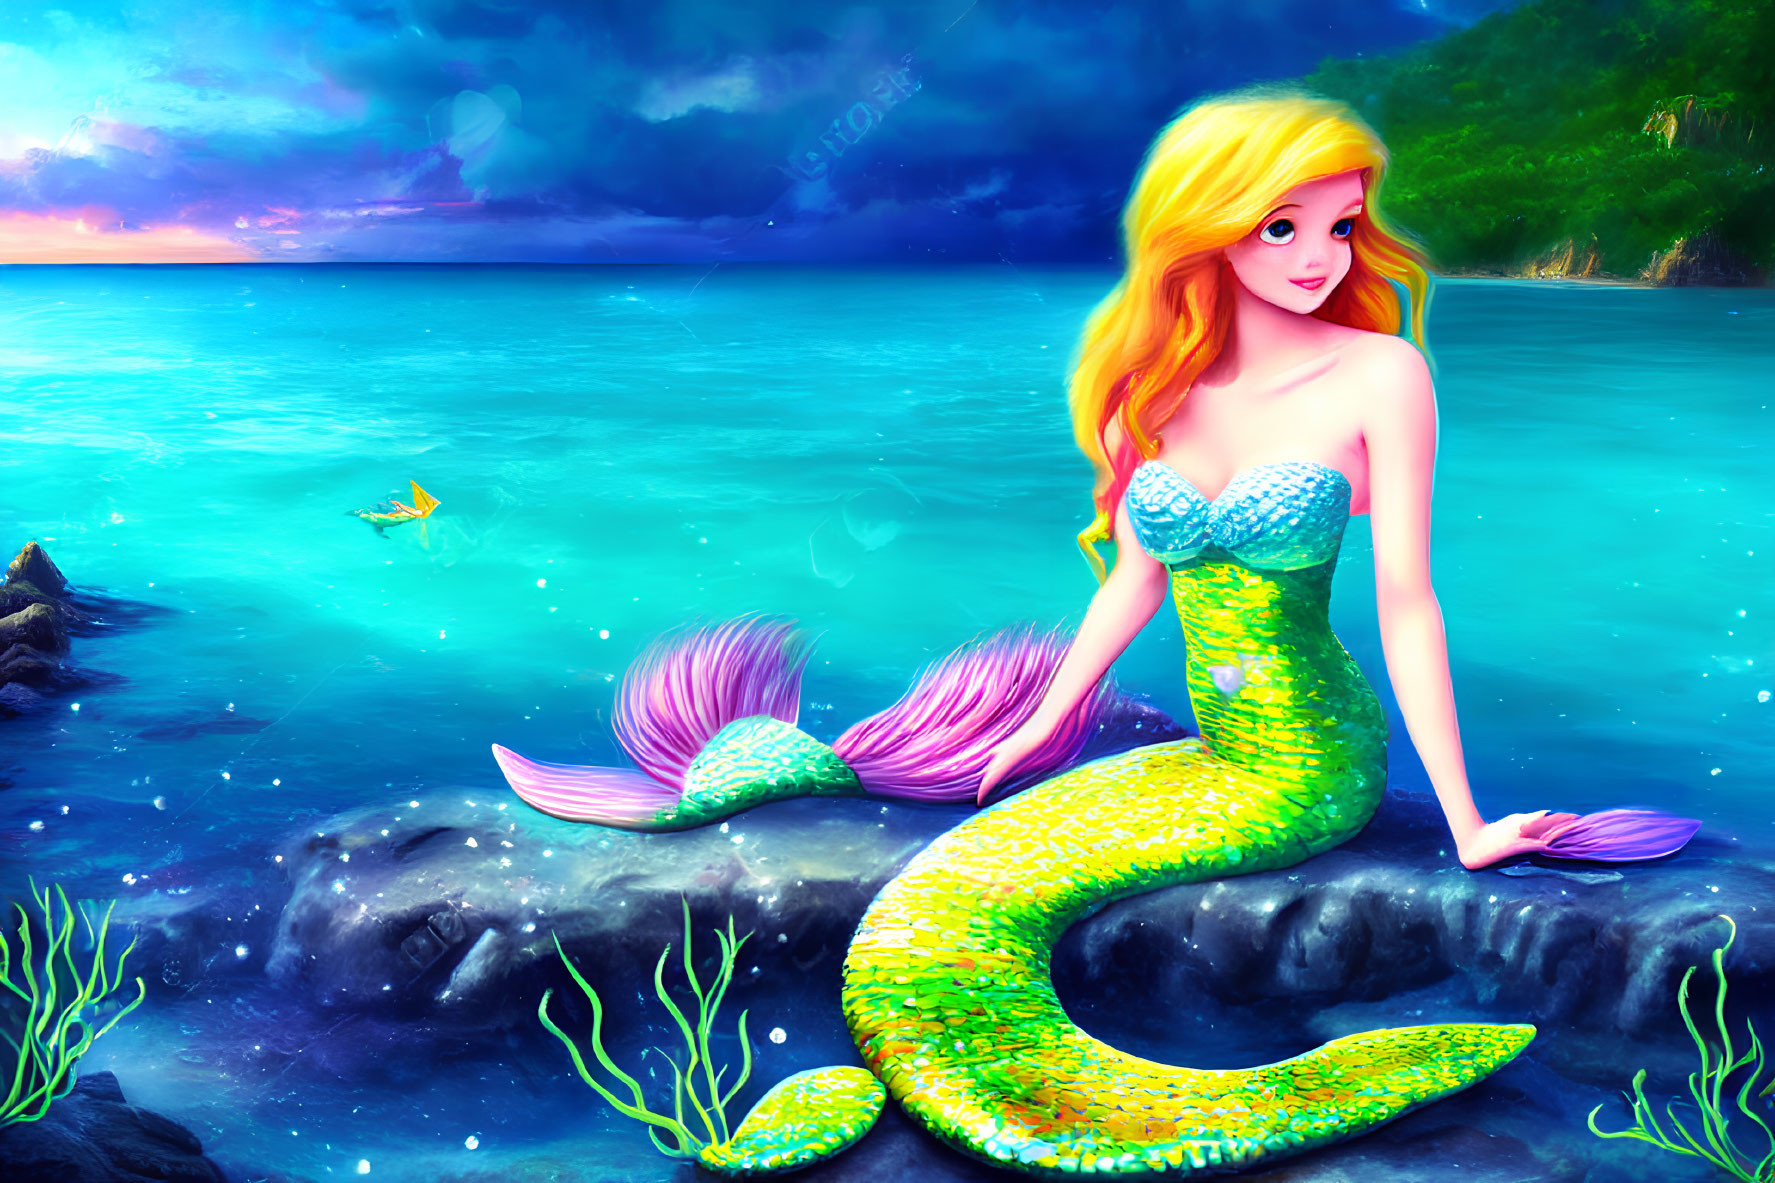 Mermaid with golden hair and green tail on rock by sea at sunset